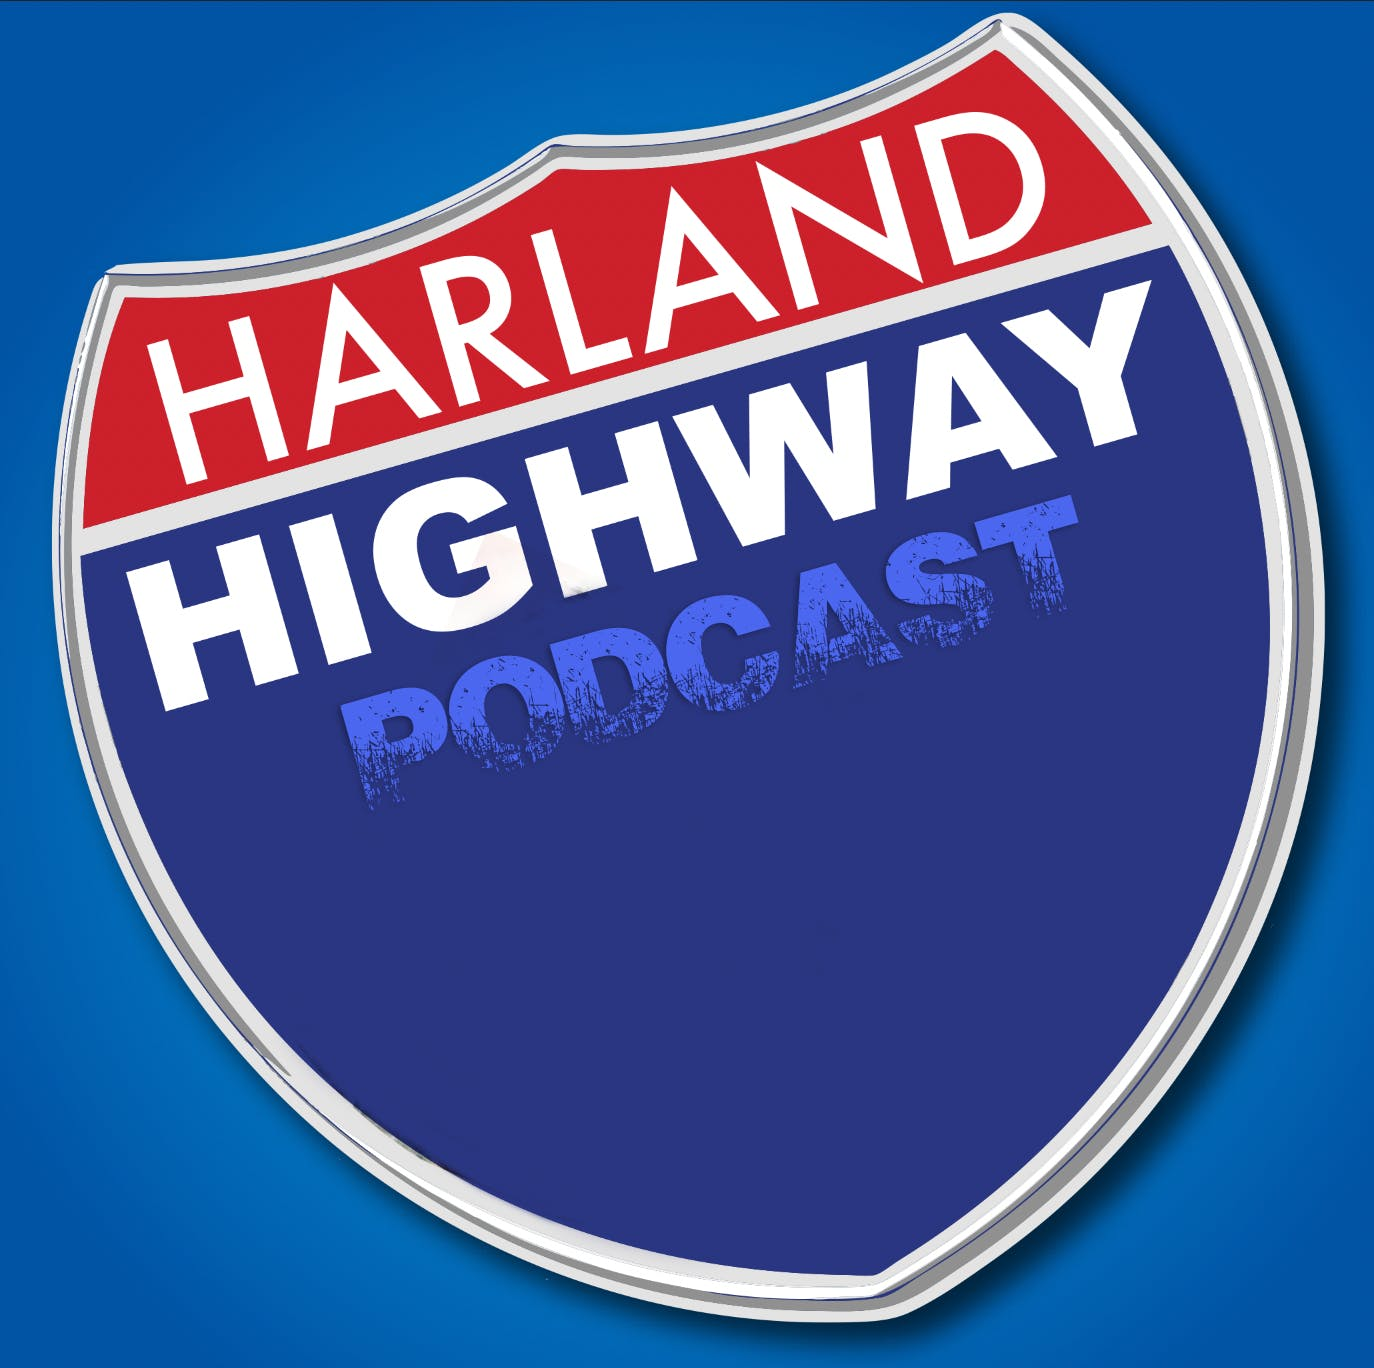 The NEW Harland Highway podcast #12